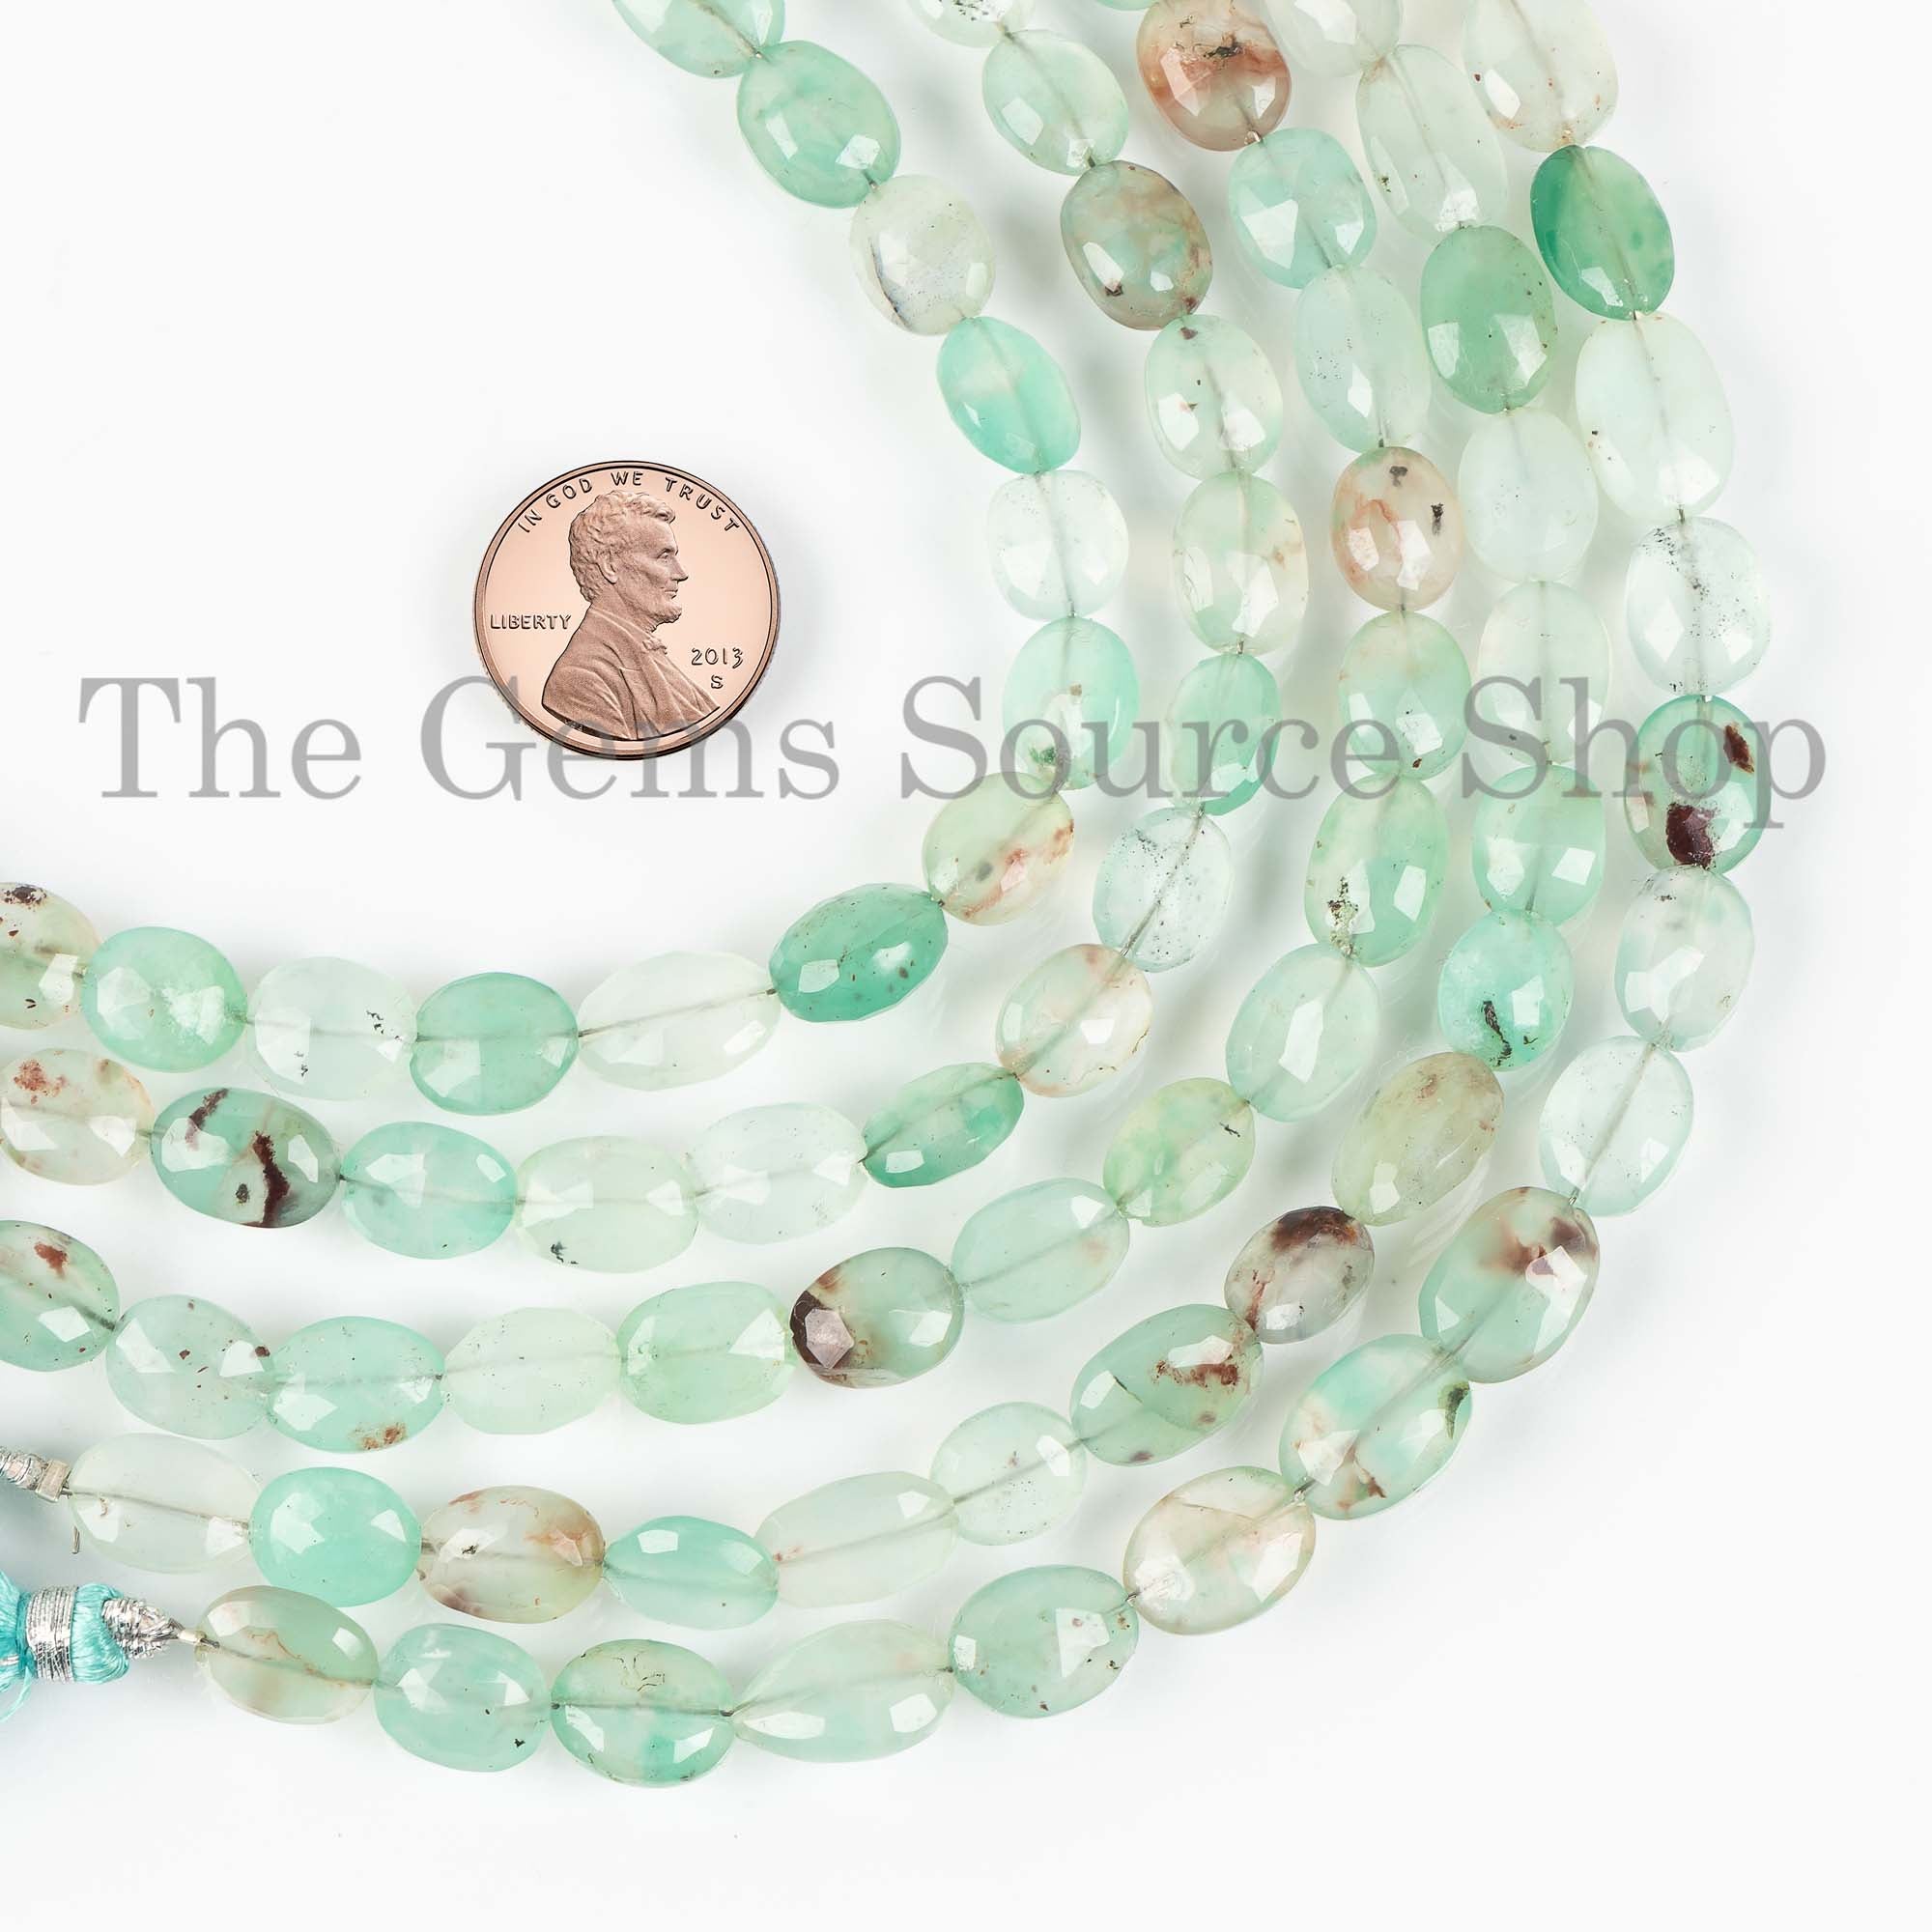 Aqua Chalcedony Faceted Oval Briolette, 7.5x9.5-8x11mm Aqua Chalcedony Beads, Oval Beads, Jewelry Making Beads, Faceted Beads